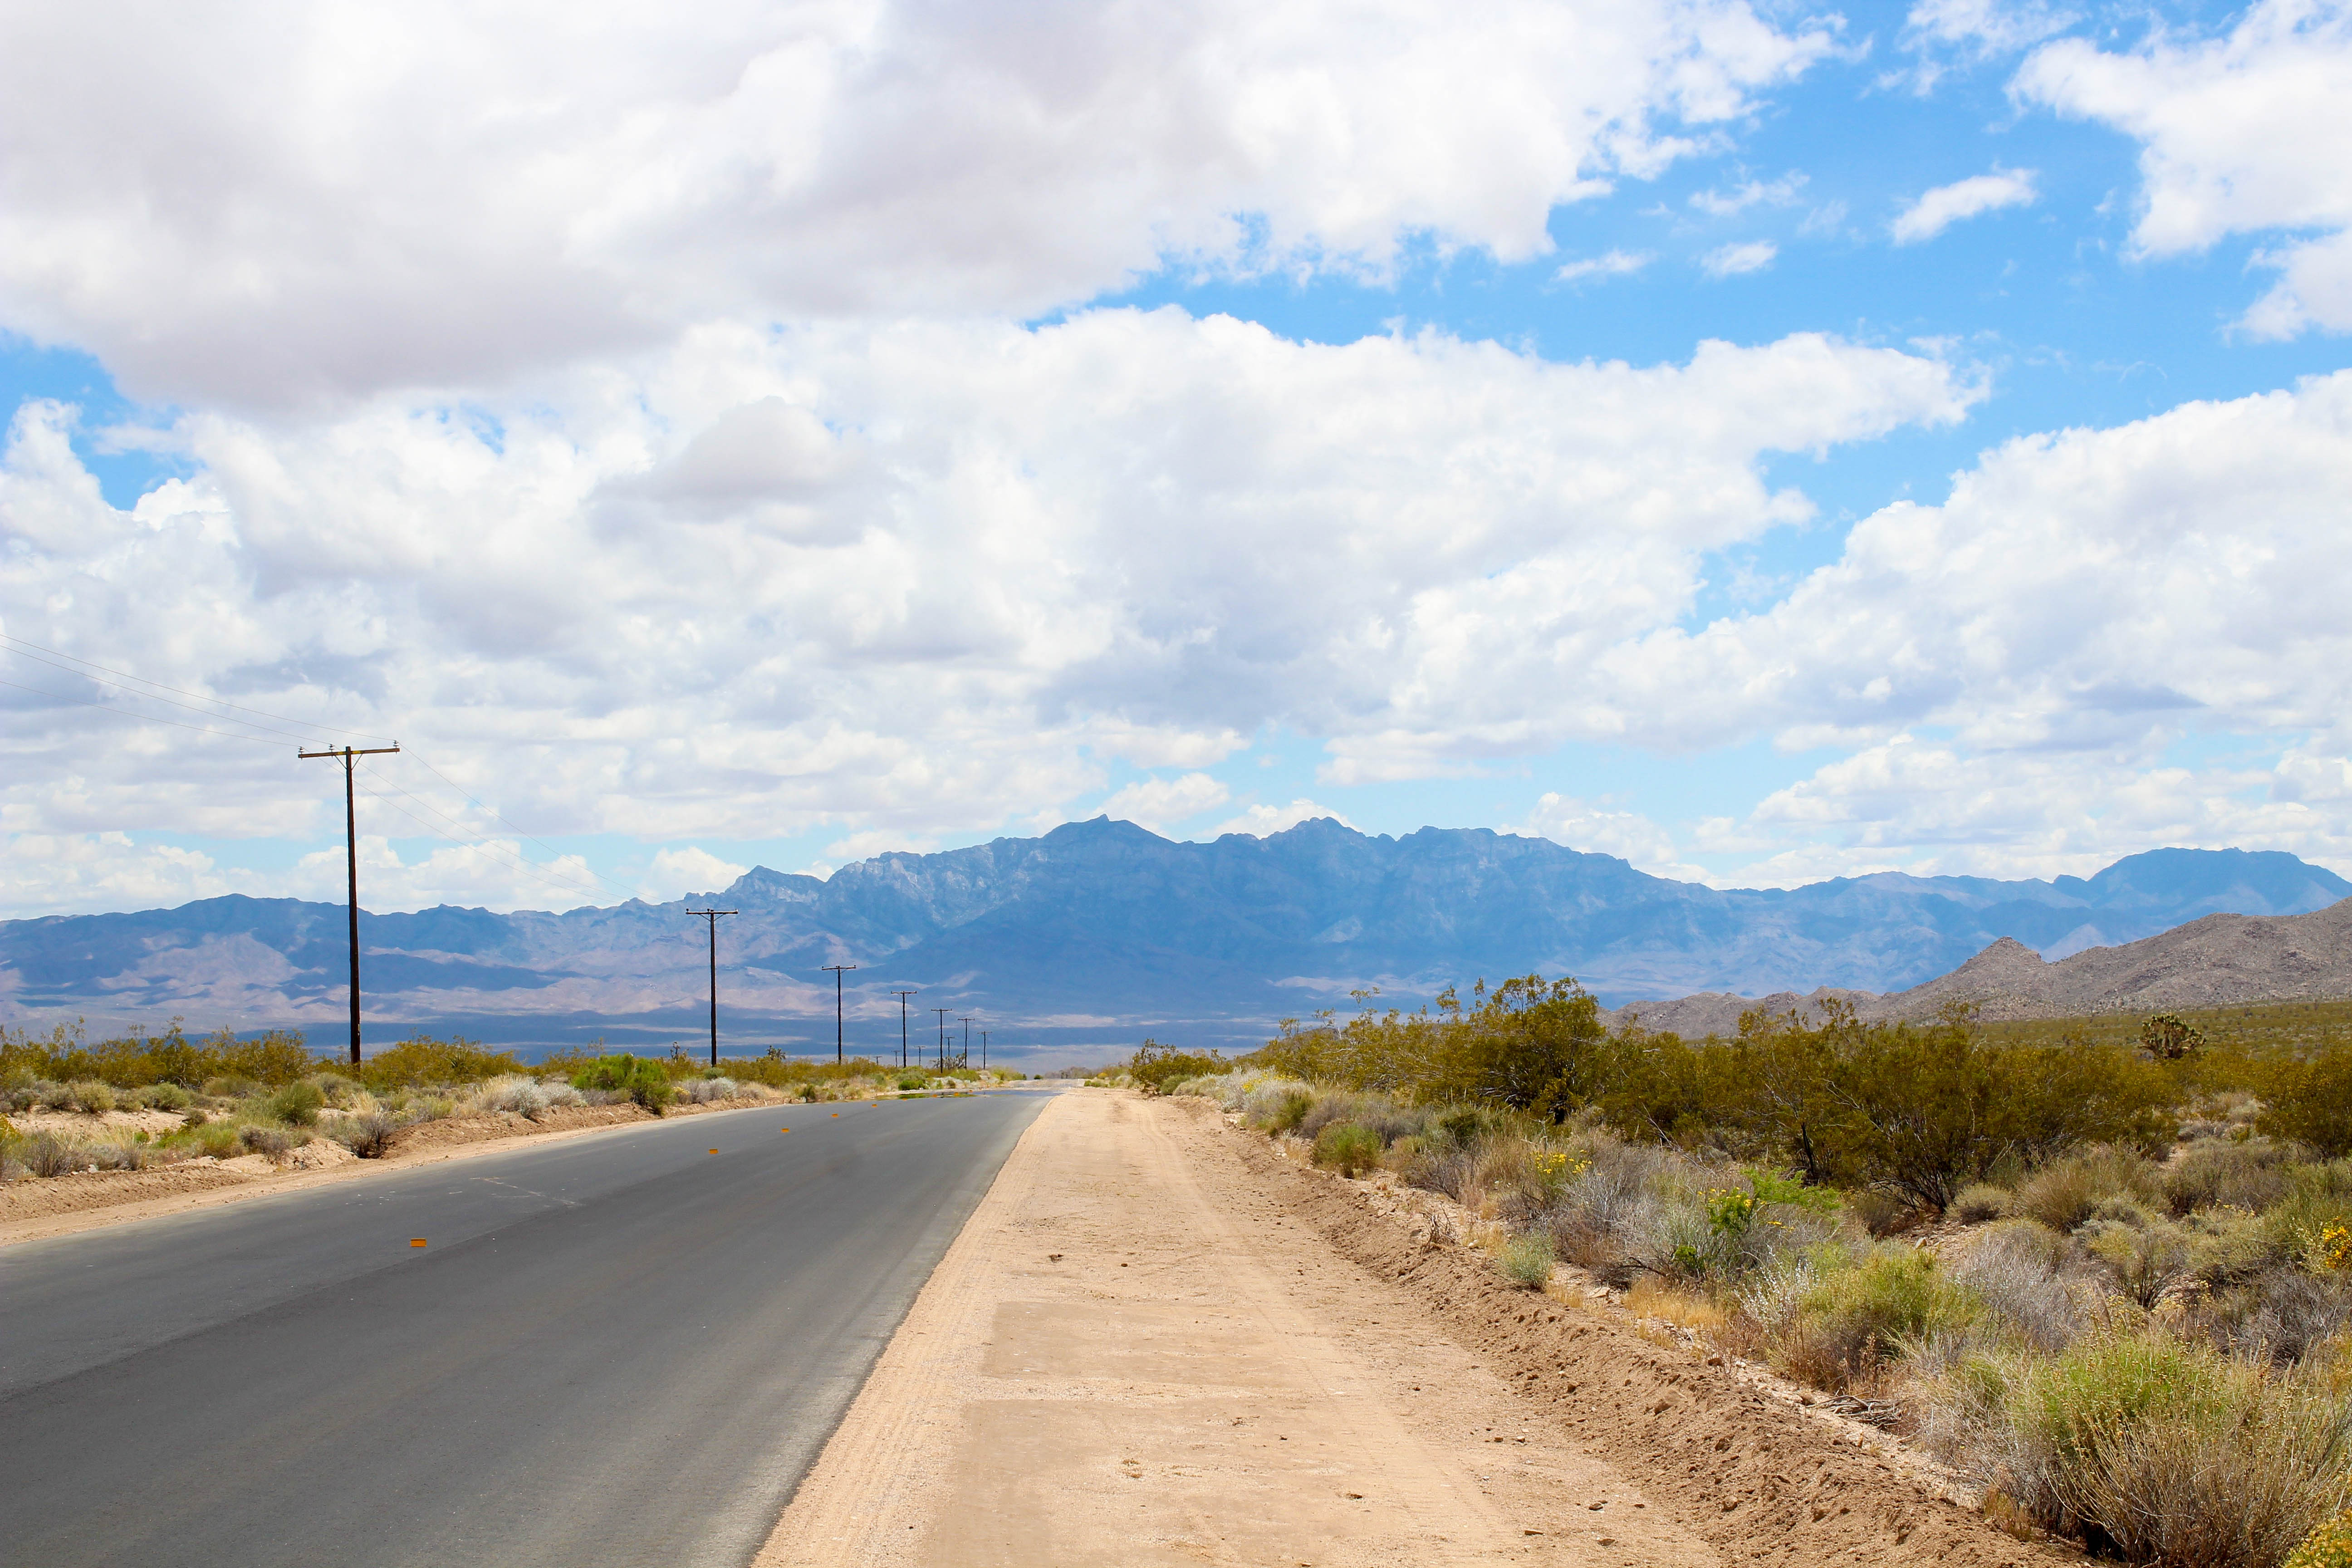 the open road in the mojave desert - one of my favorite road trip photos